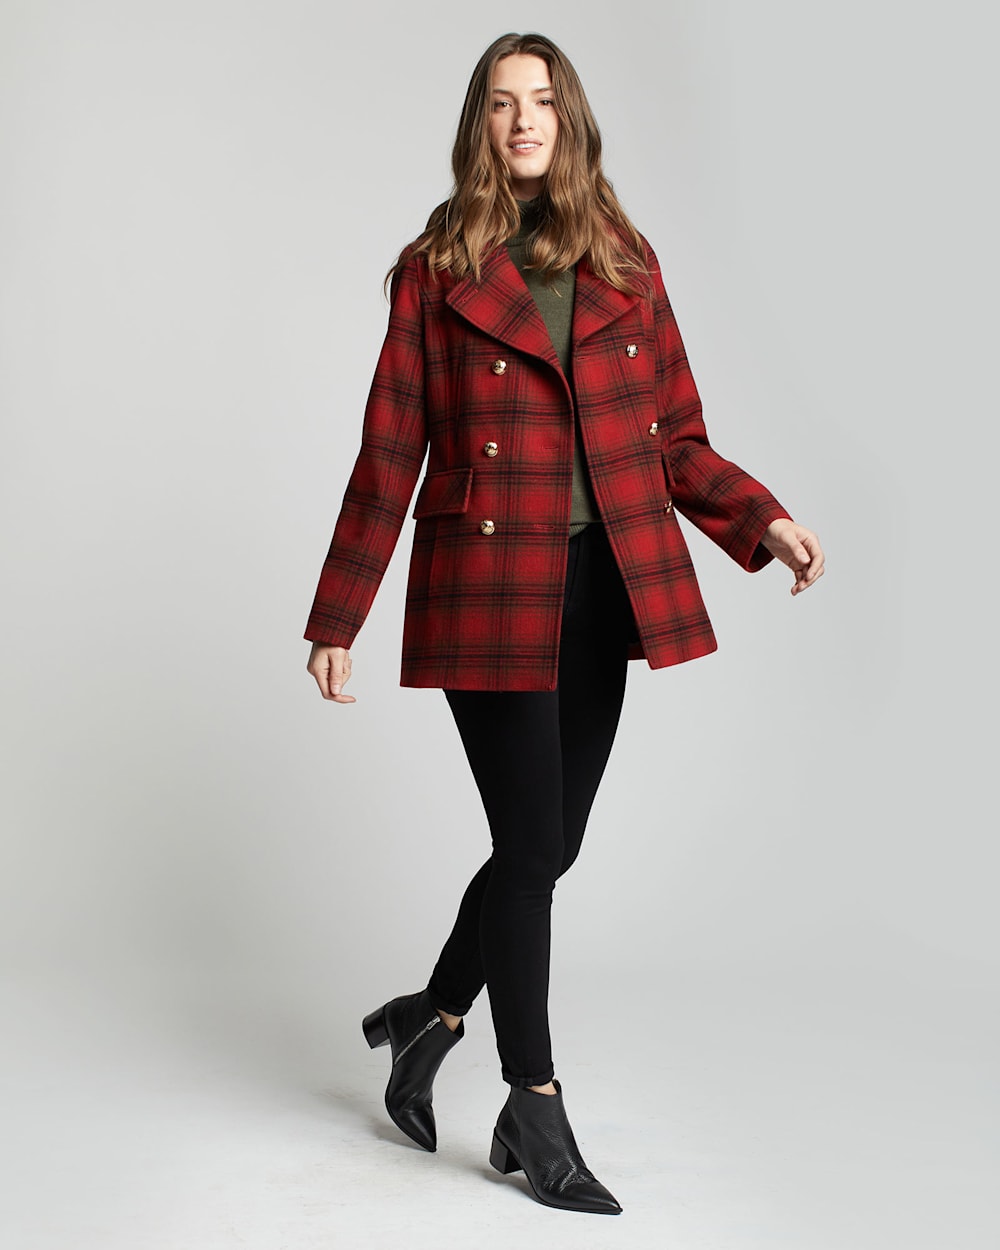 ALTERNATE VIEW OF WOMEN'S PLAID WOOL PEACOAT IN RED/CHARCOAL/DEEP OLIVE image number 5